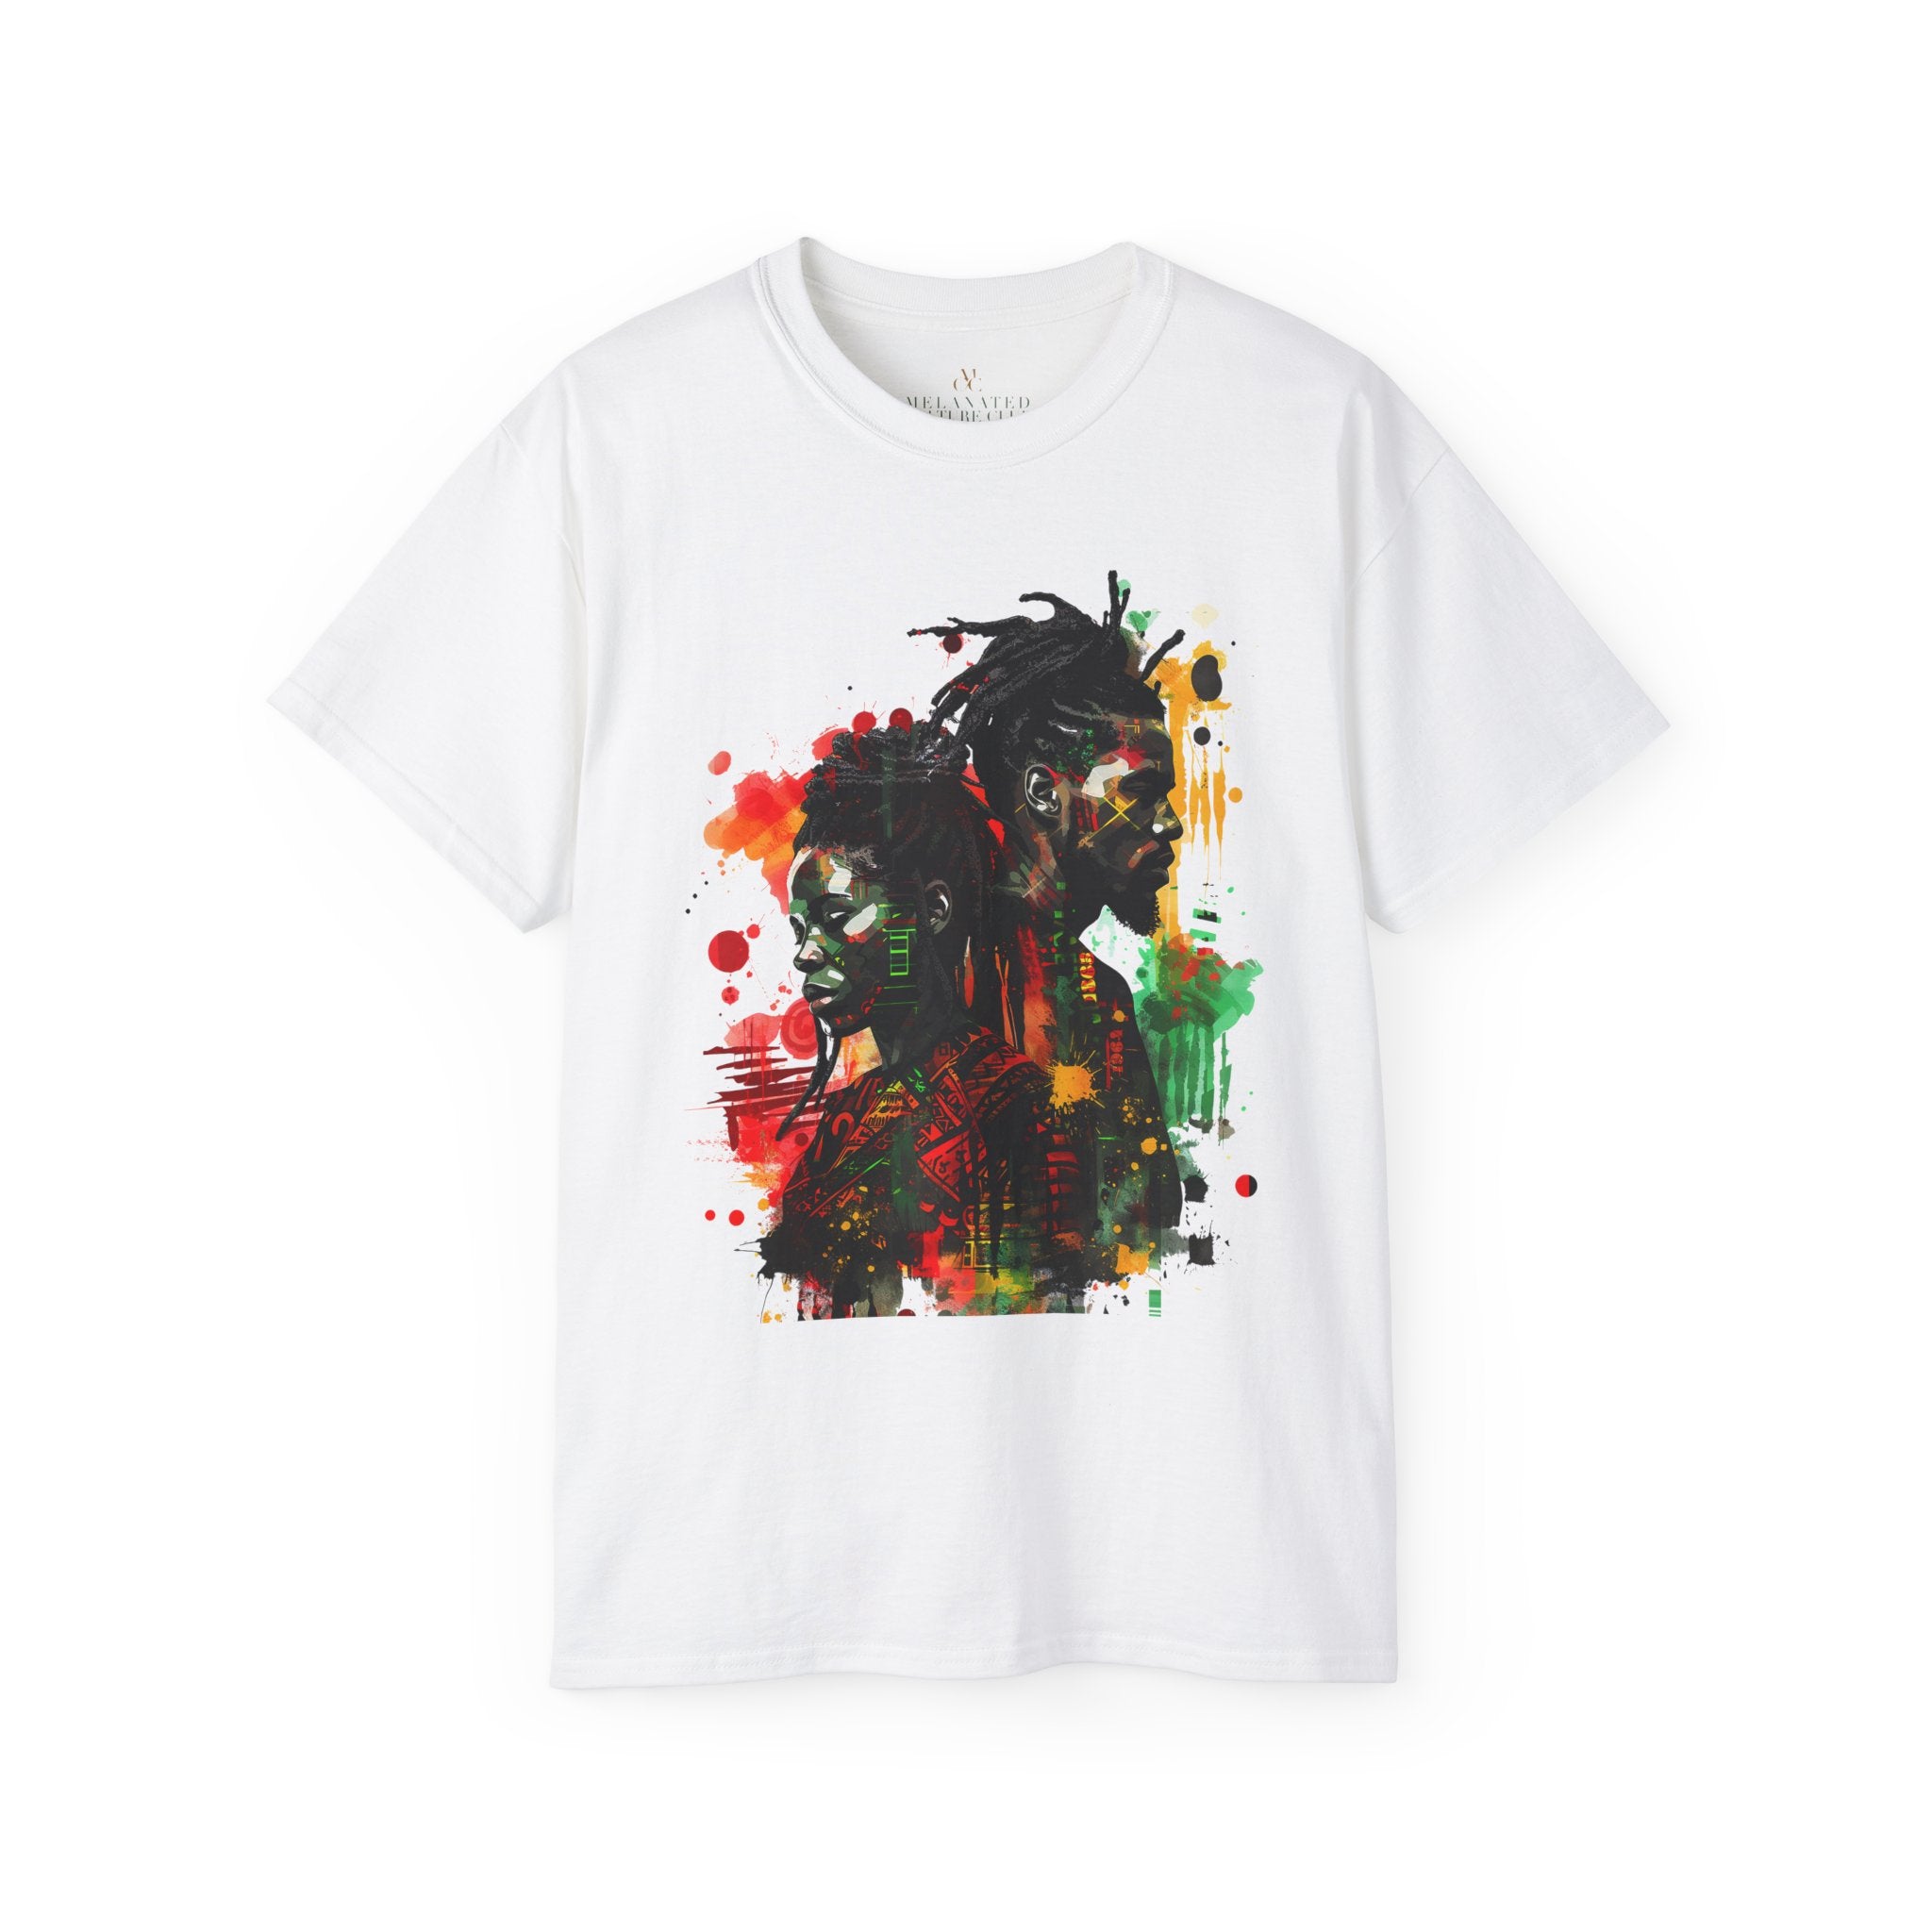 Abstract art tee shirt in white.